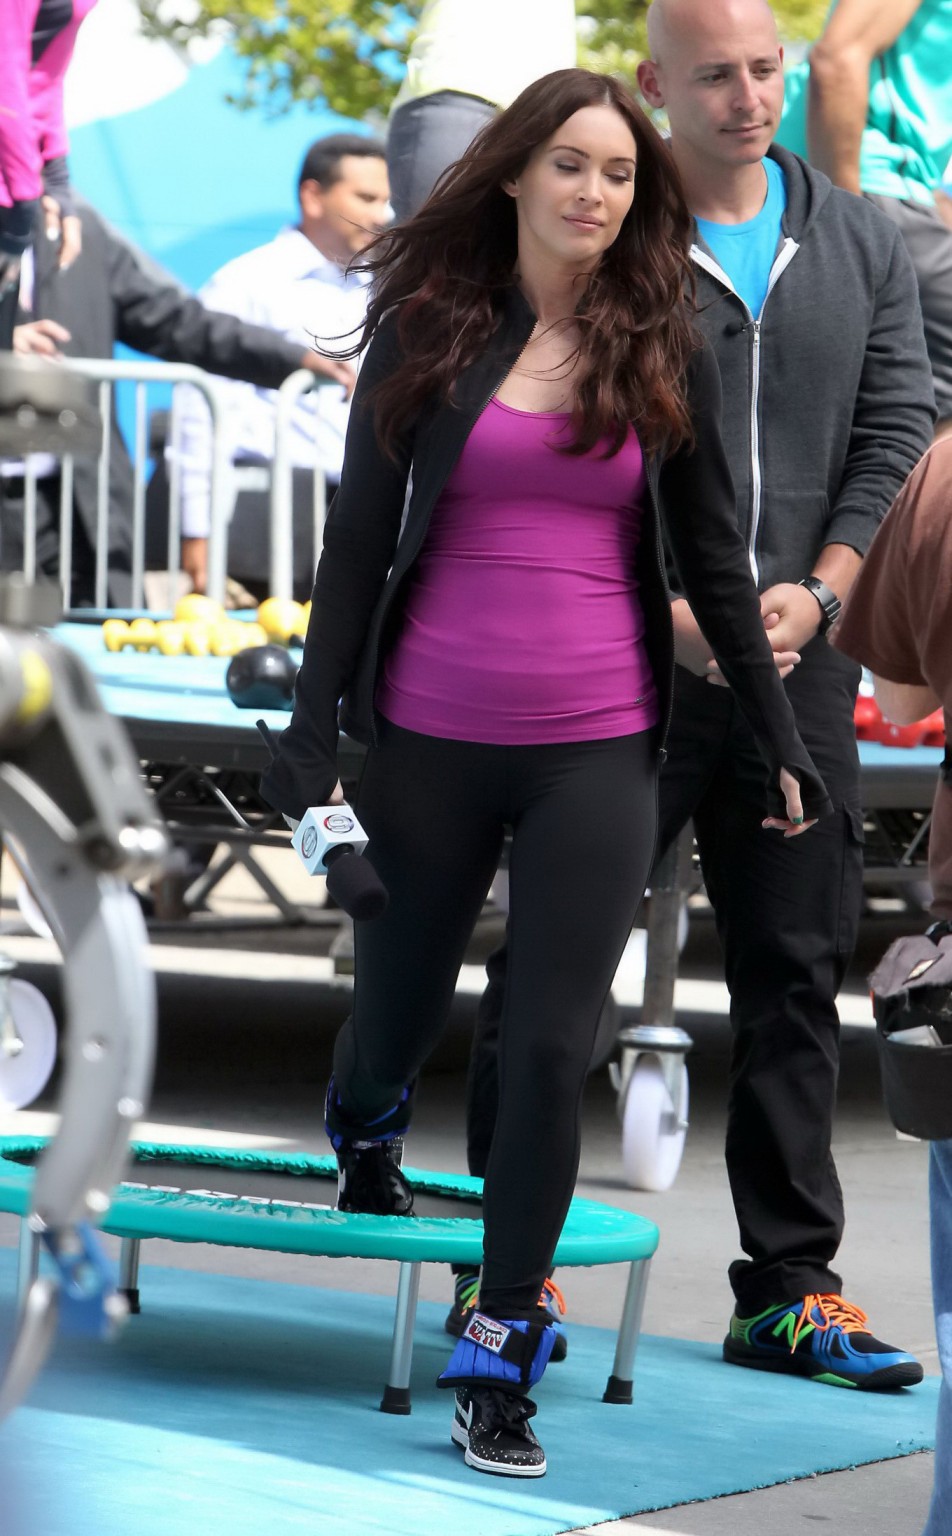 Megan Fox cleavy wearing tight outfit while jumps on trampoline at the TMNT set #75233051